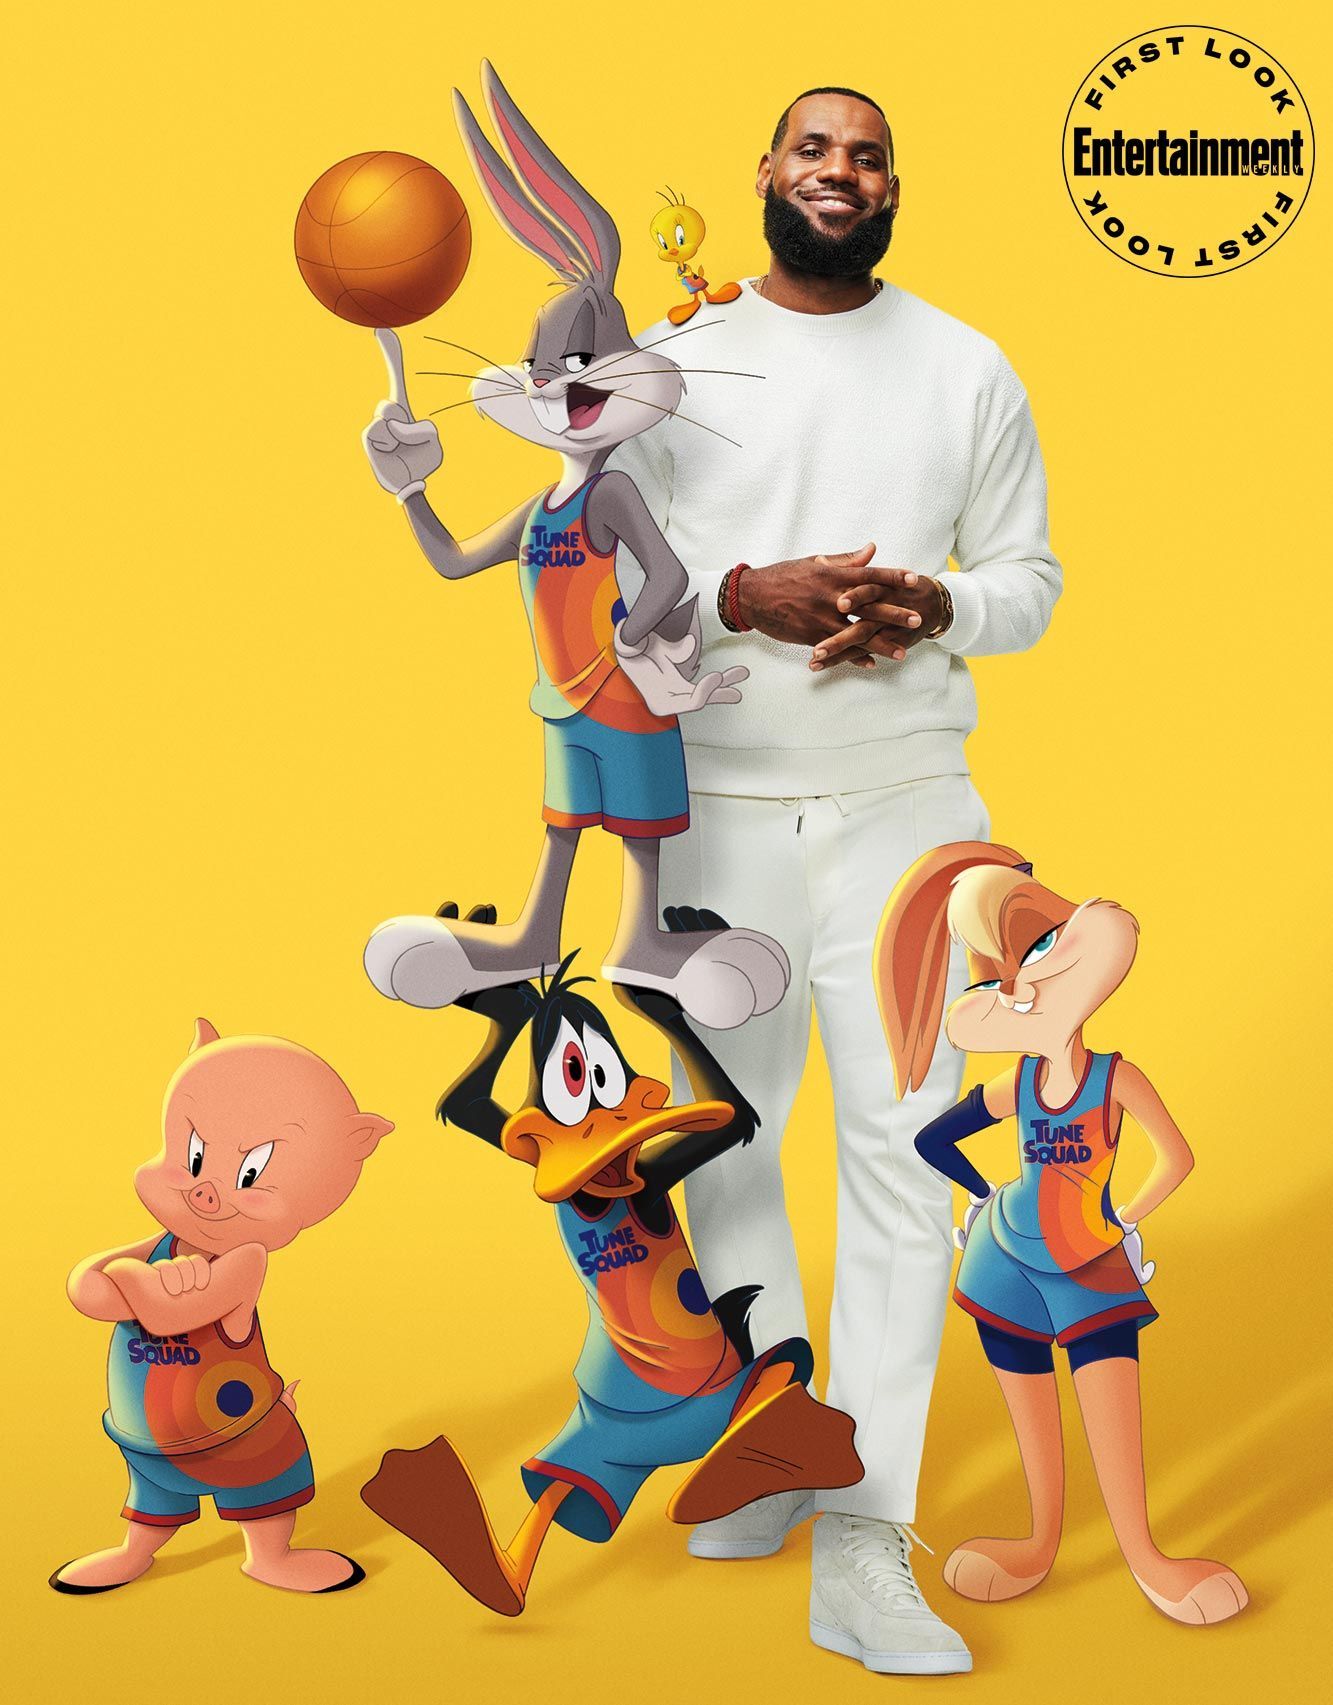 Game on! LeBron James balls out in 'Space Jam: A New Legacy' first look. Space jam, Looney tunes wallpaper, Looney tunes space jam